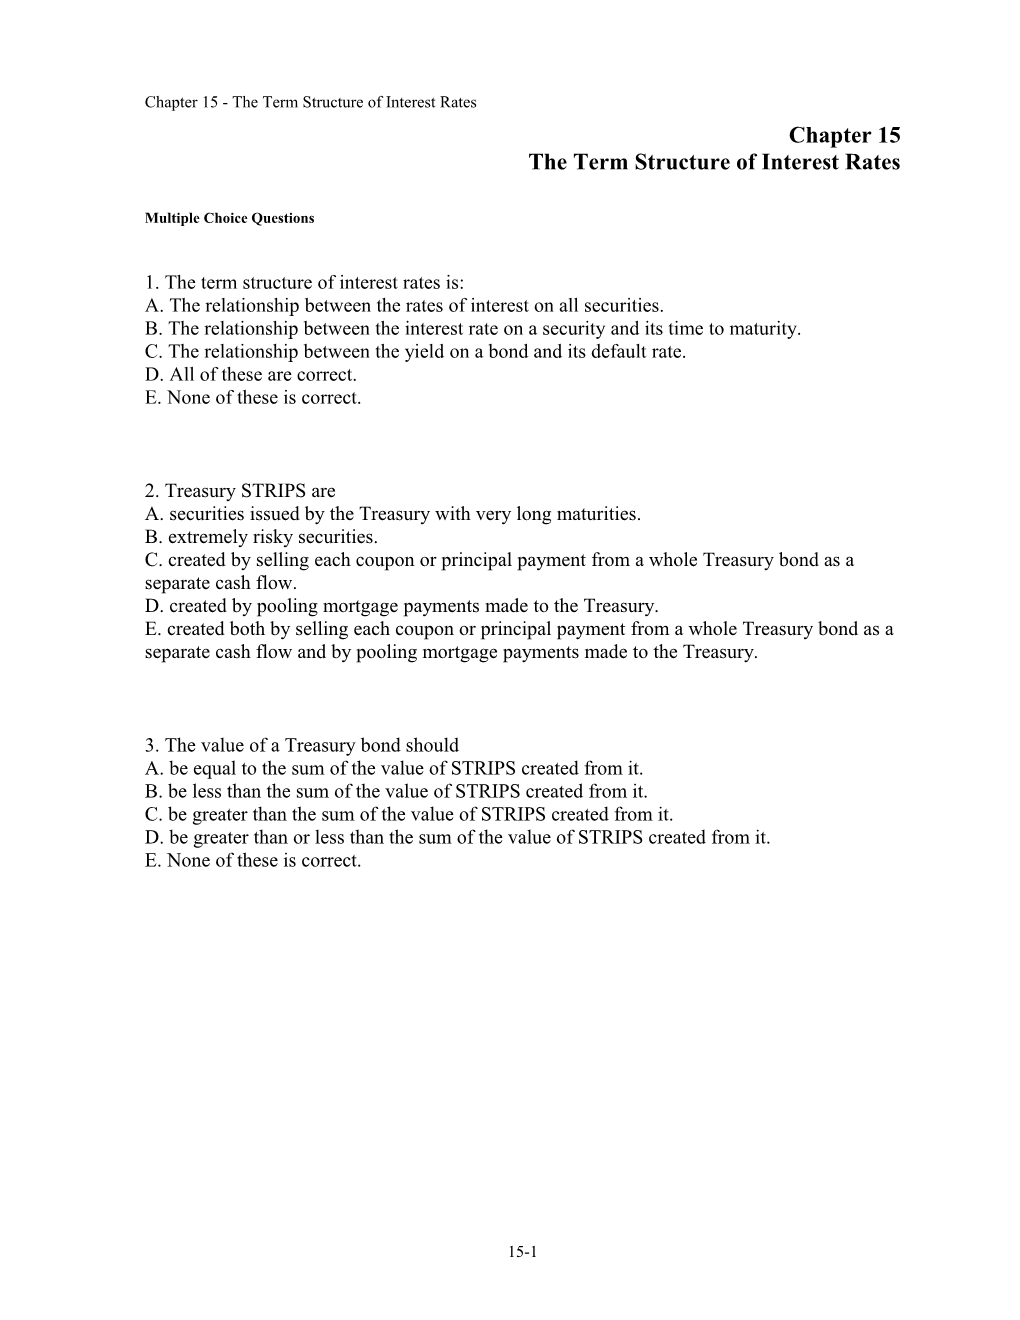 Chapter 15 the Term Structure of Interest Rates